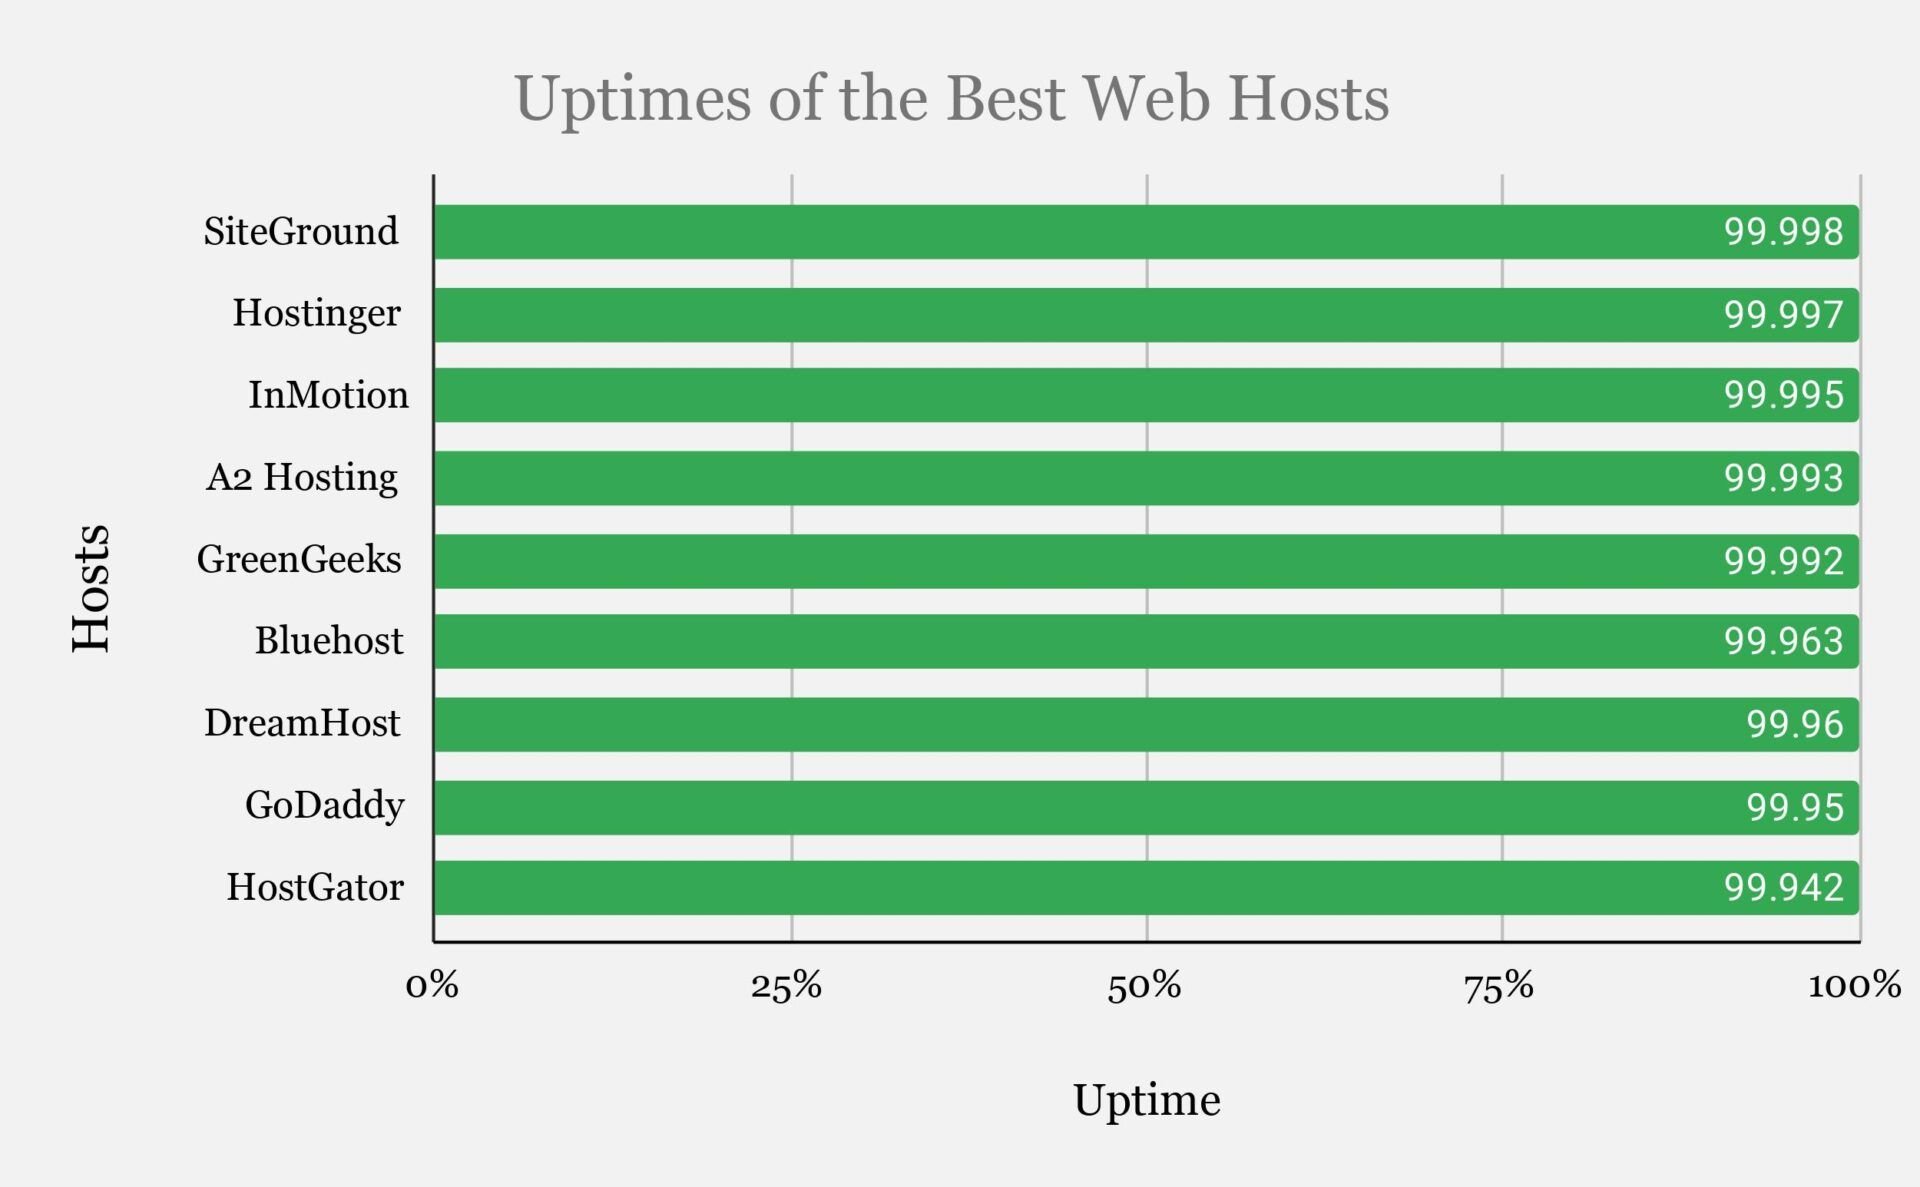 Uptimes of the Best Web Hosts